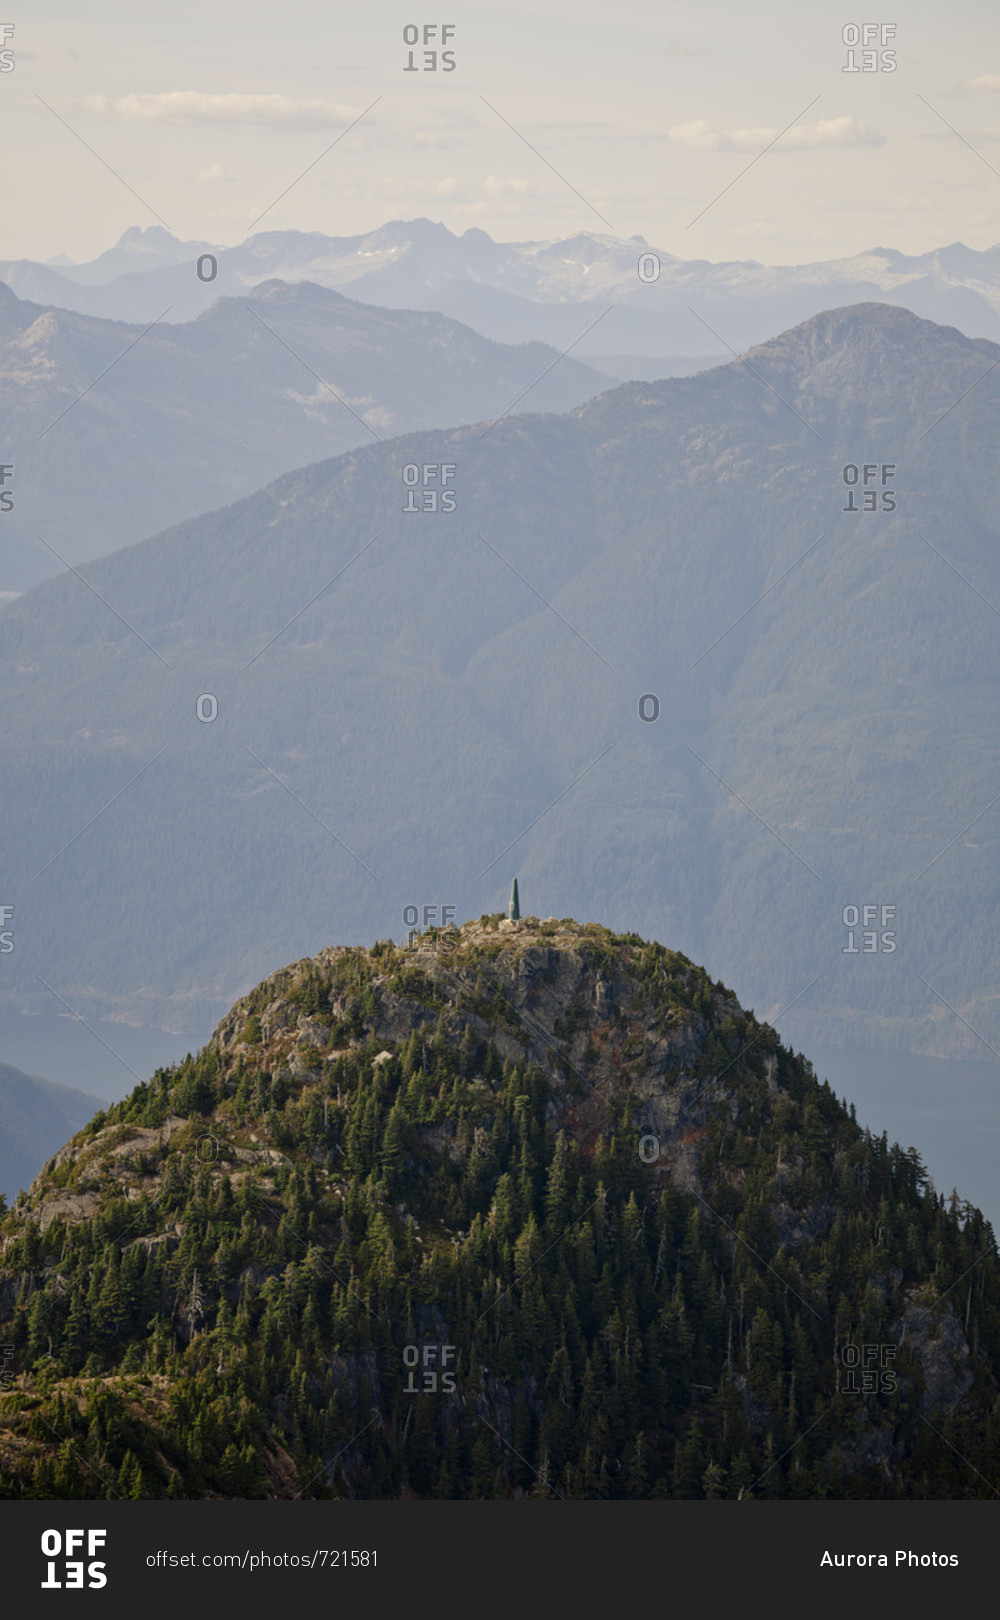 Distant view of radio tower on top of mountain, Coast Mountains, Vancouver, British Columbia, Canada